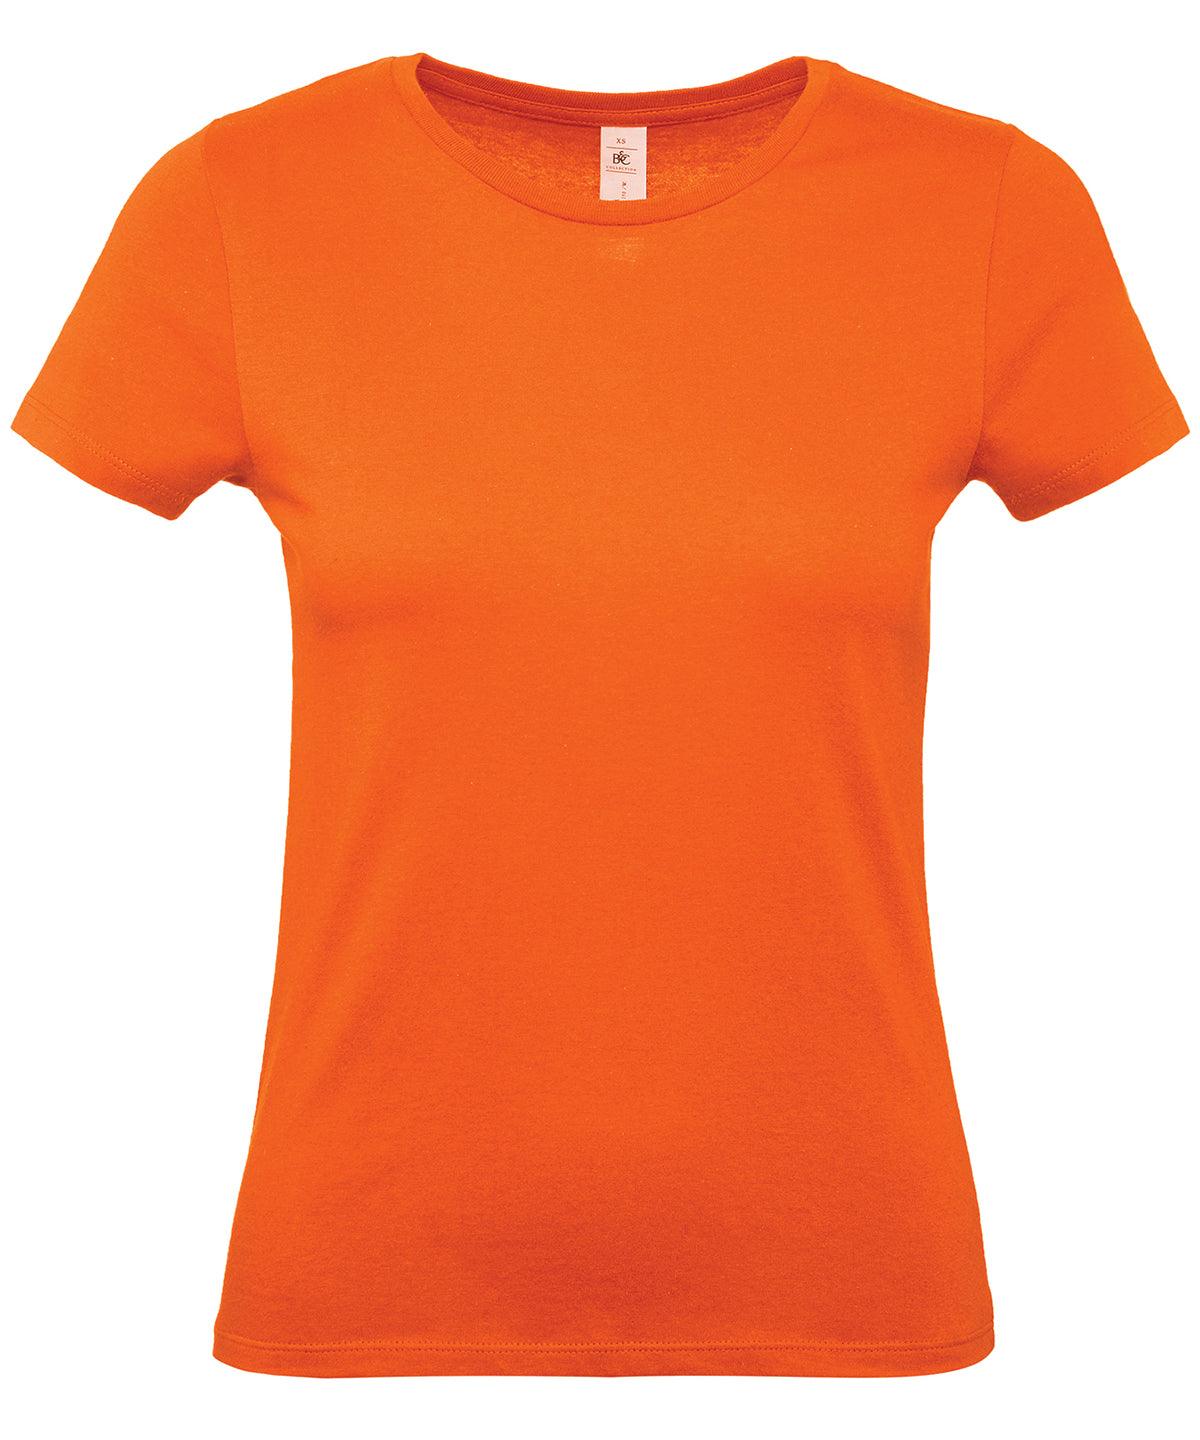 Orange - B&C #E150 /women T-Shirts B&C Collection Holiday Season, Hyperbrights and Neons, Must Haves, Plus Sizes, T-Shirts & Vests Schoolwear Centres